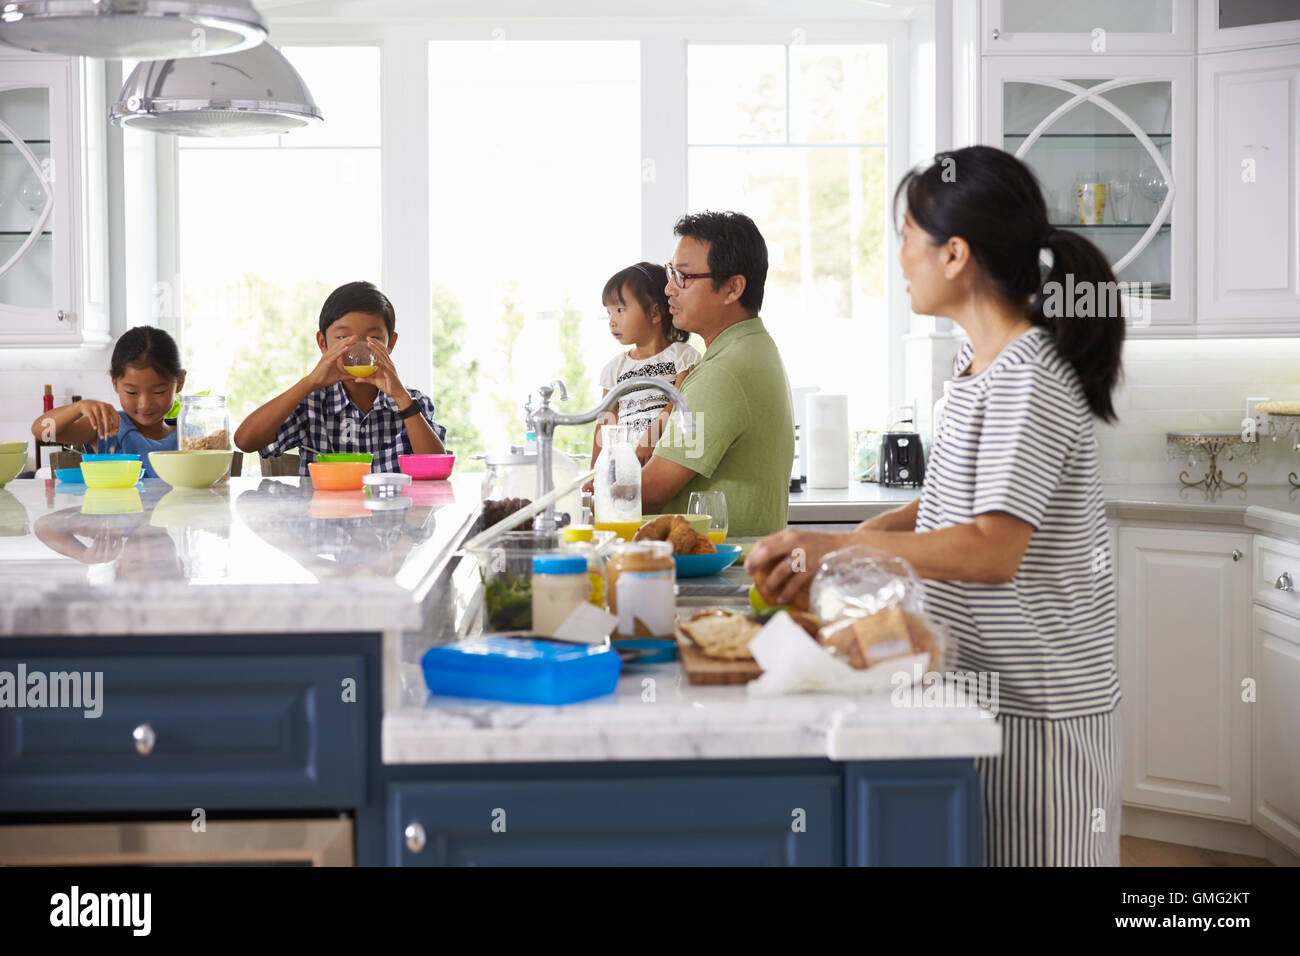 Family Having Breakfast And Making Lunches In Kitchen Stock Photo